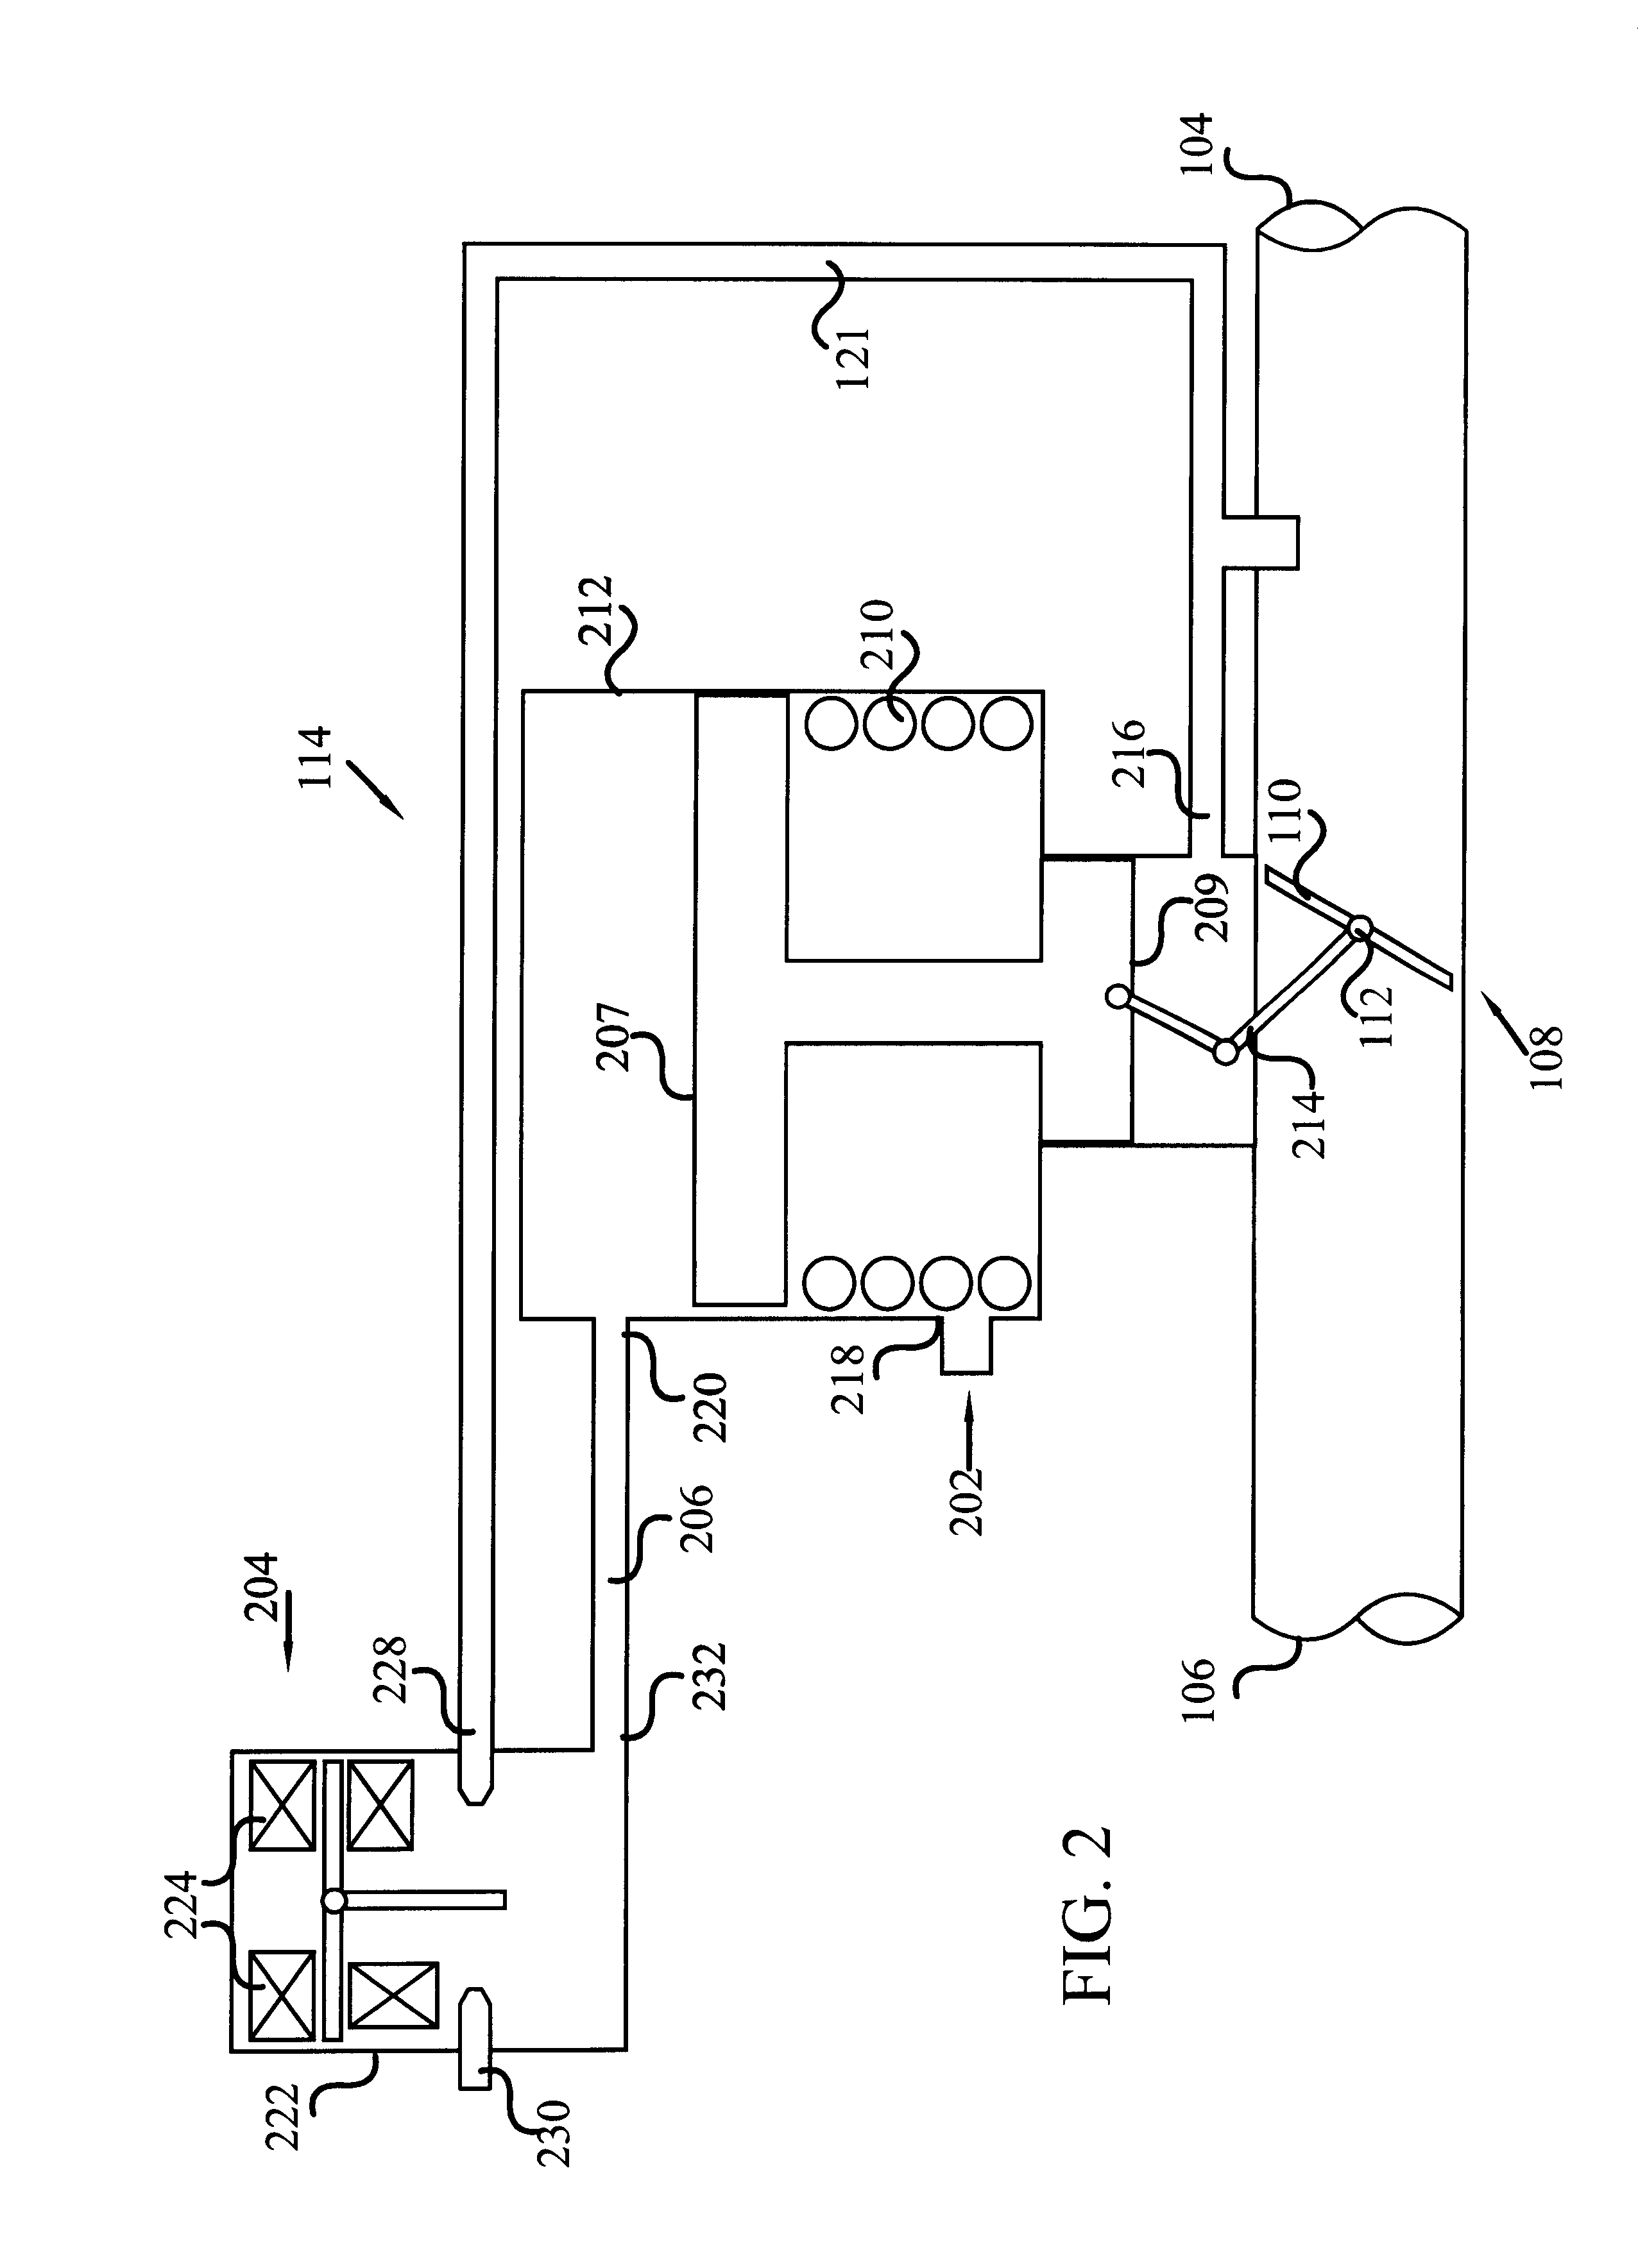 Flow control valve with integral sensor and controller and related method